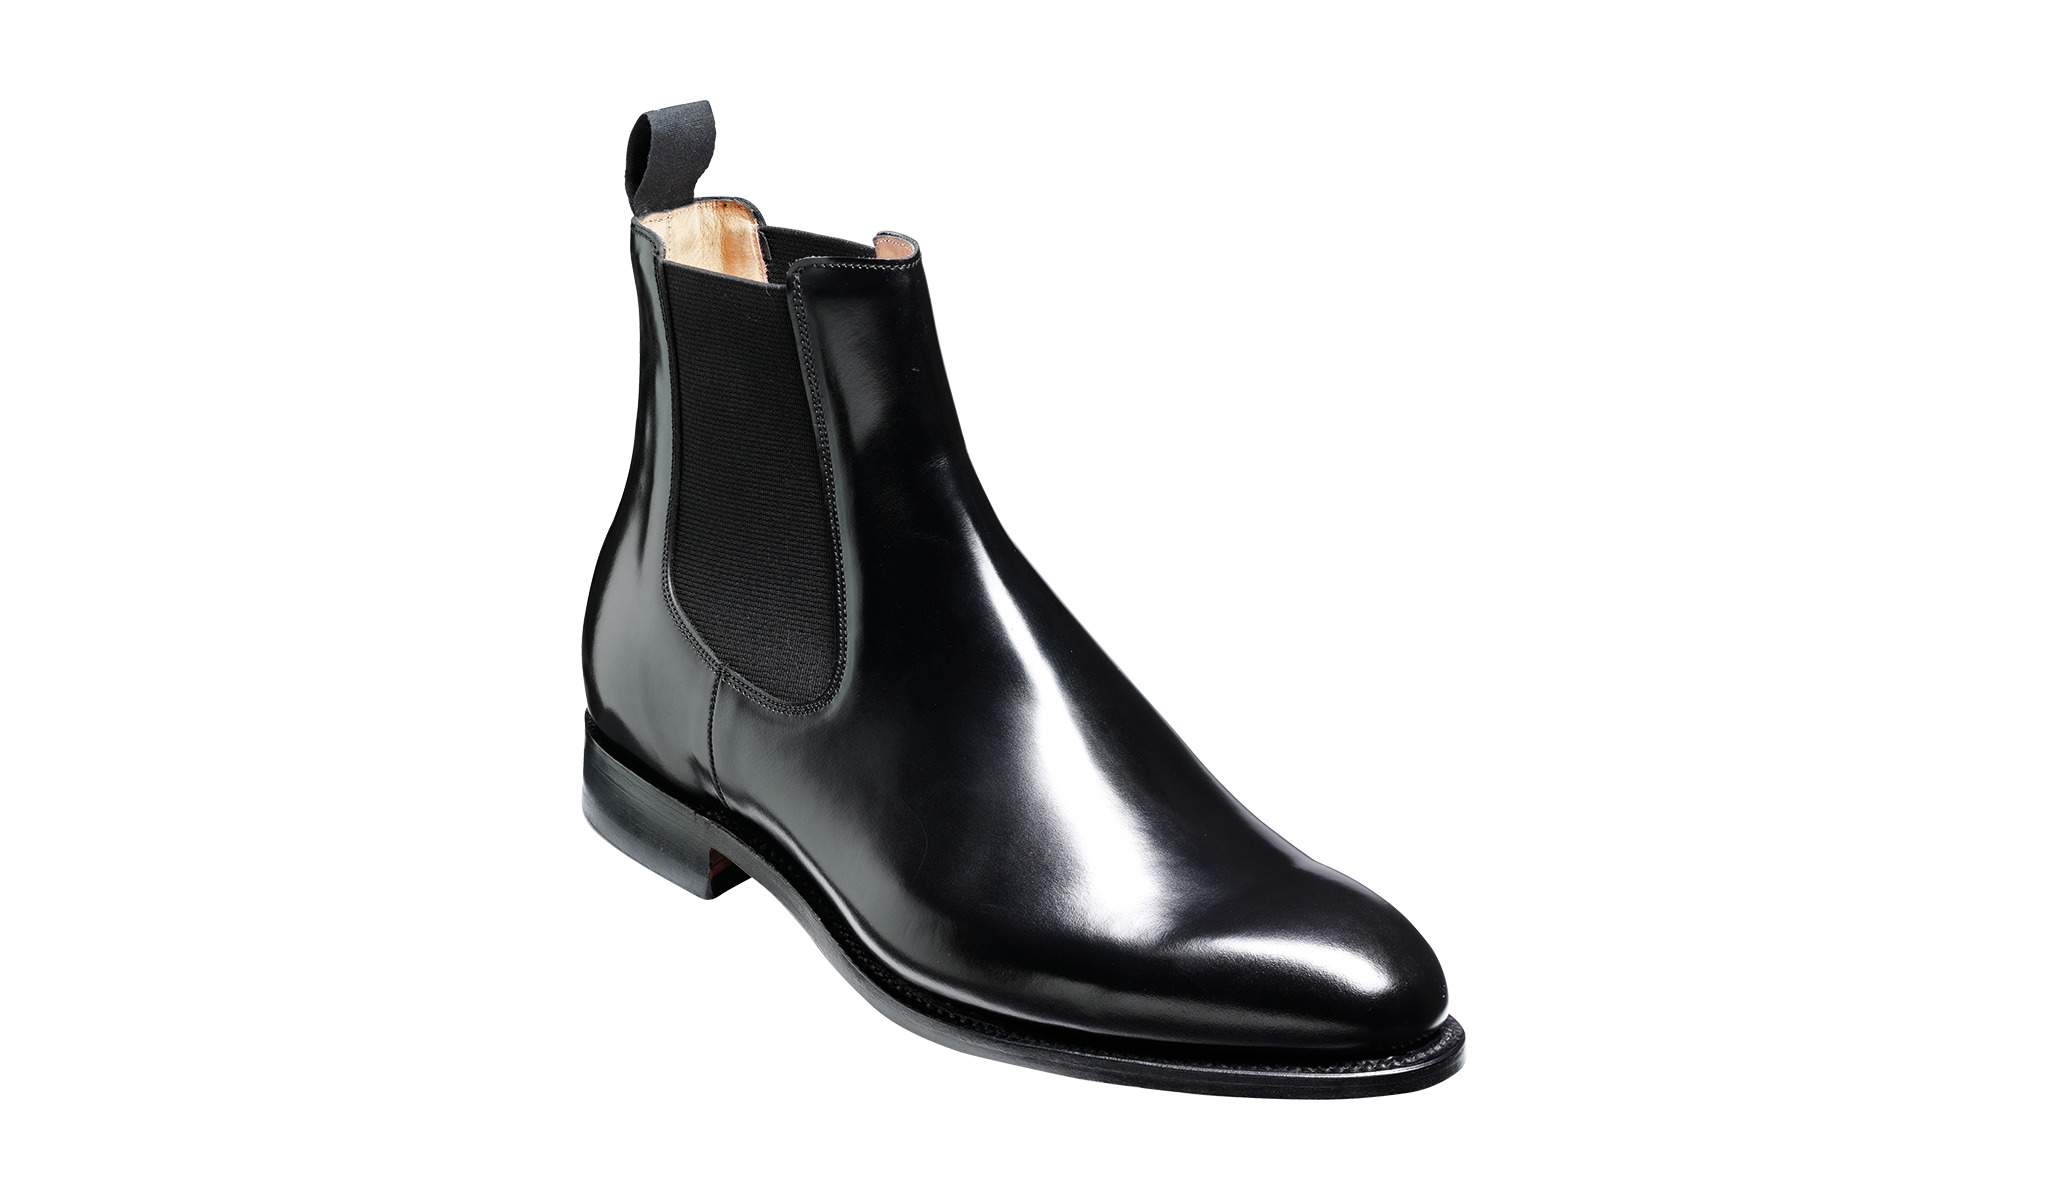 Log in  Chelsea boots men outfit, Black chelsea boots outfit, European mens  fashion